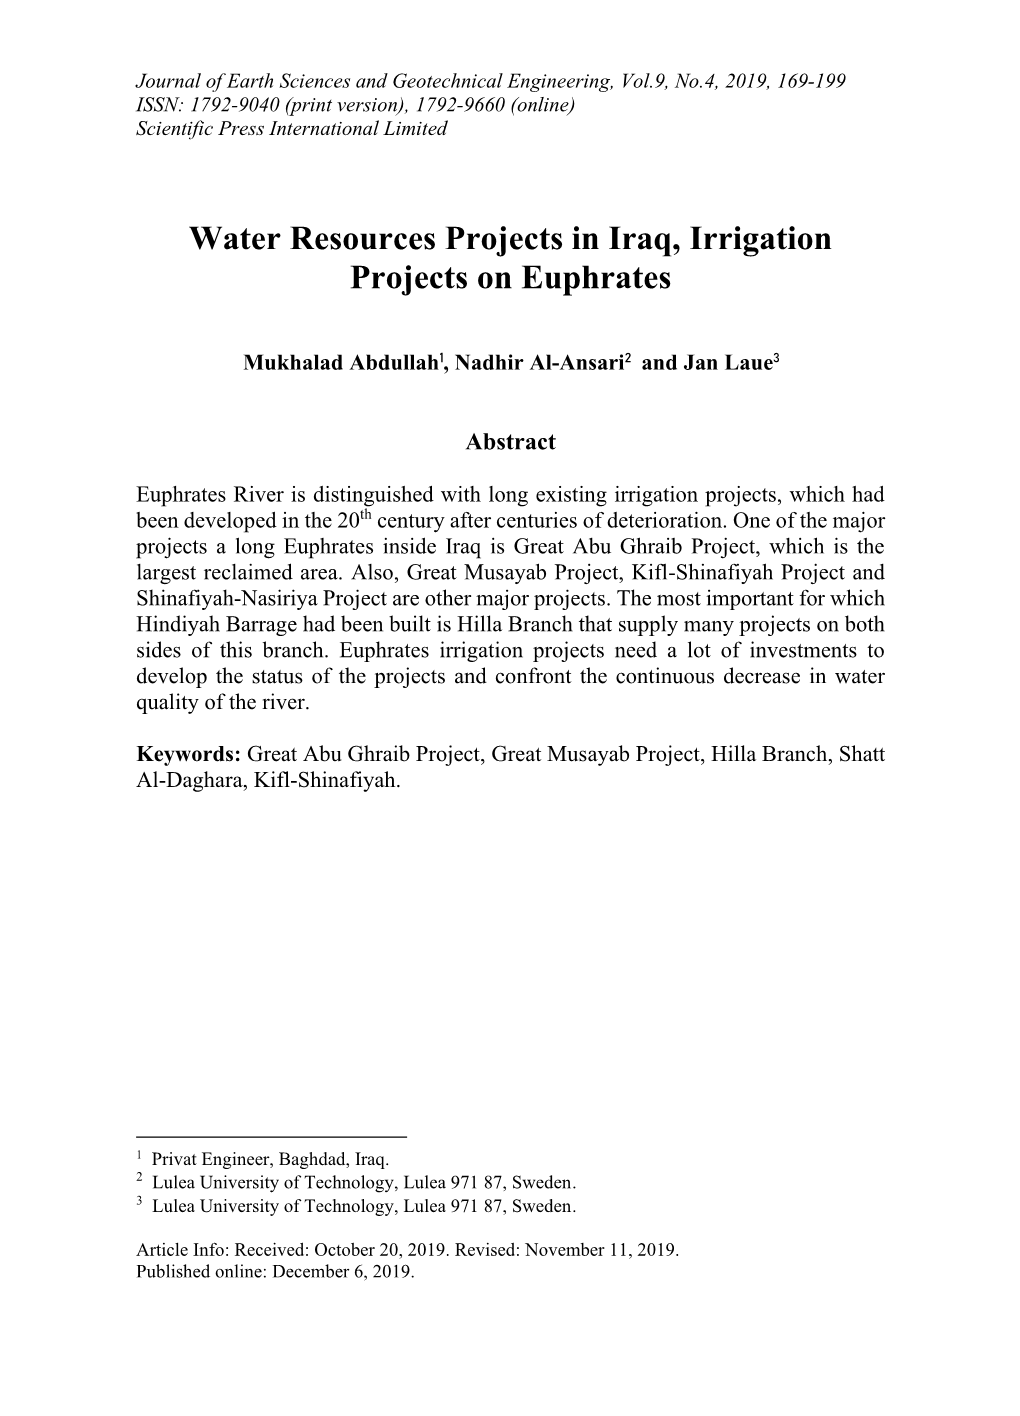 Water Resources Projects in Iraq, Irrigation Projects on Euphrates